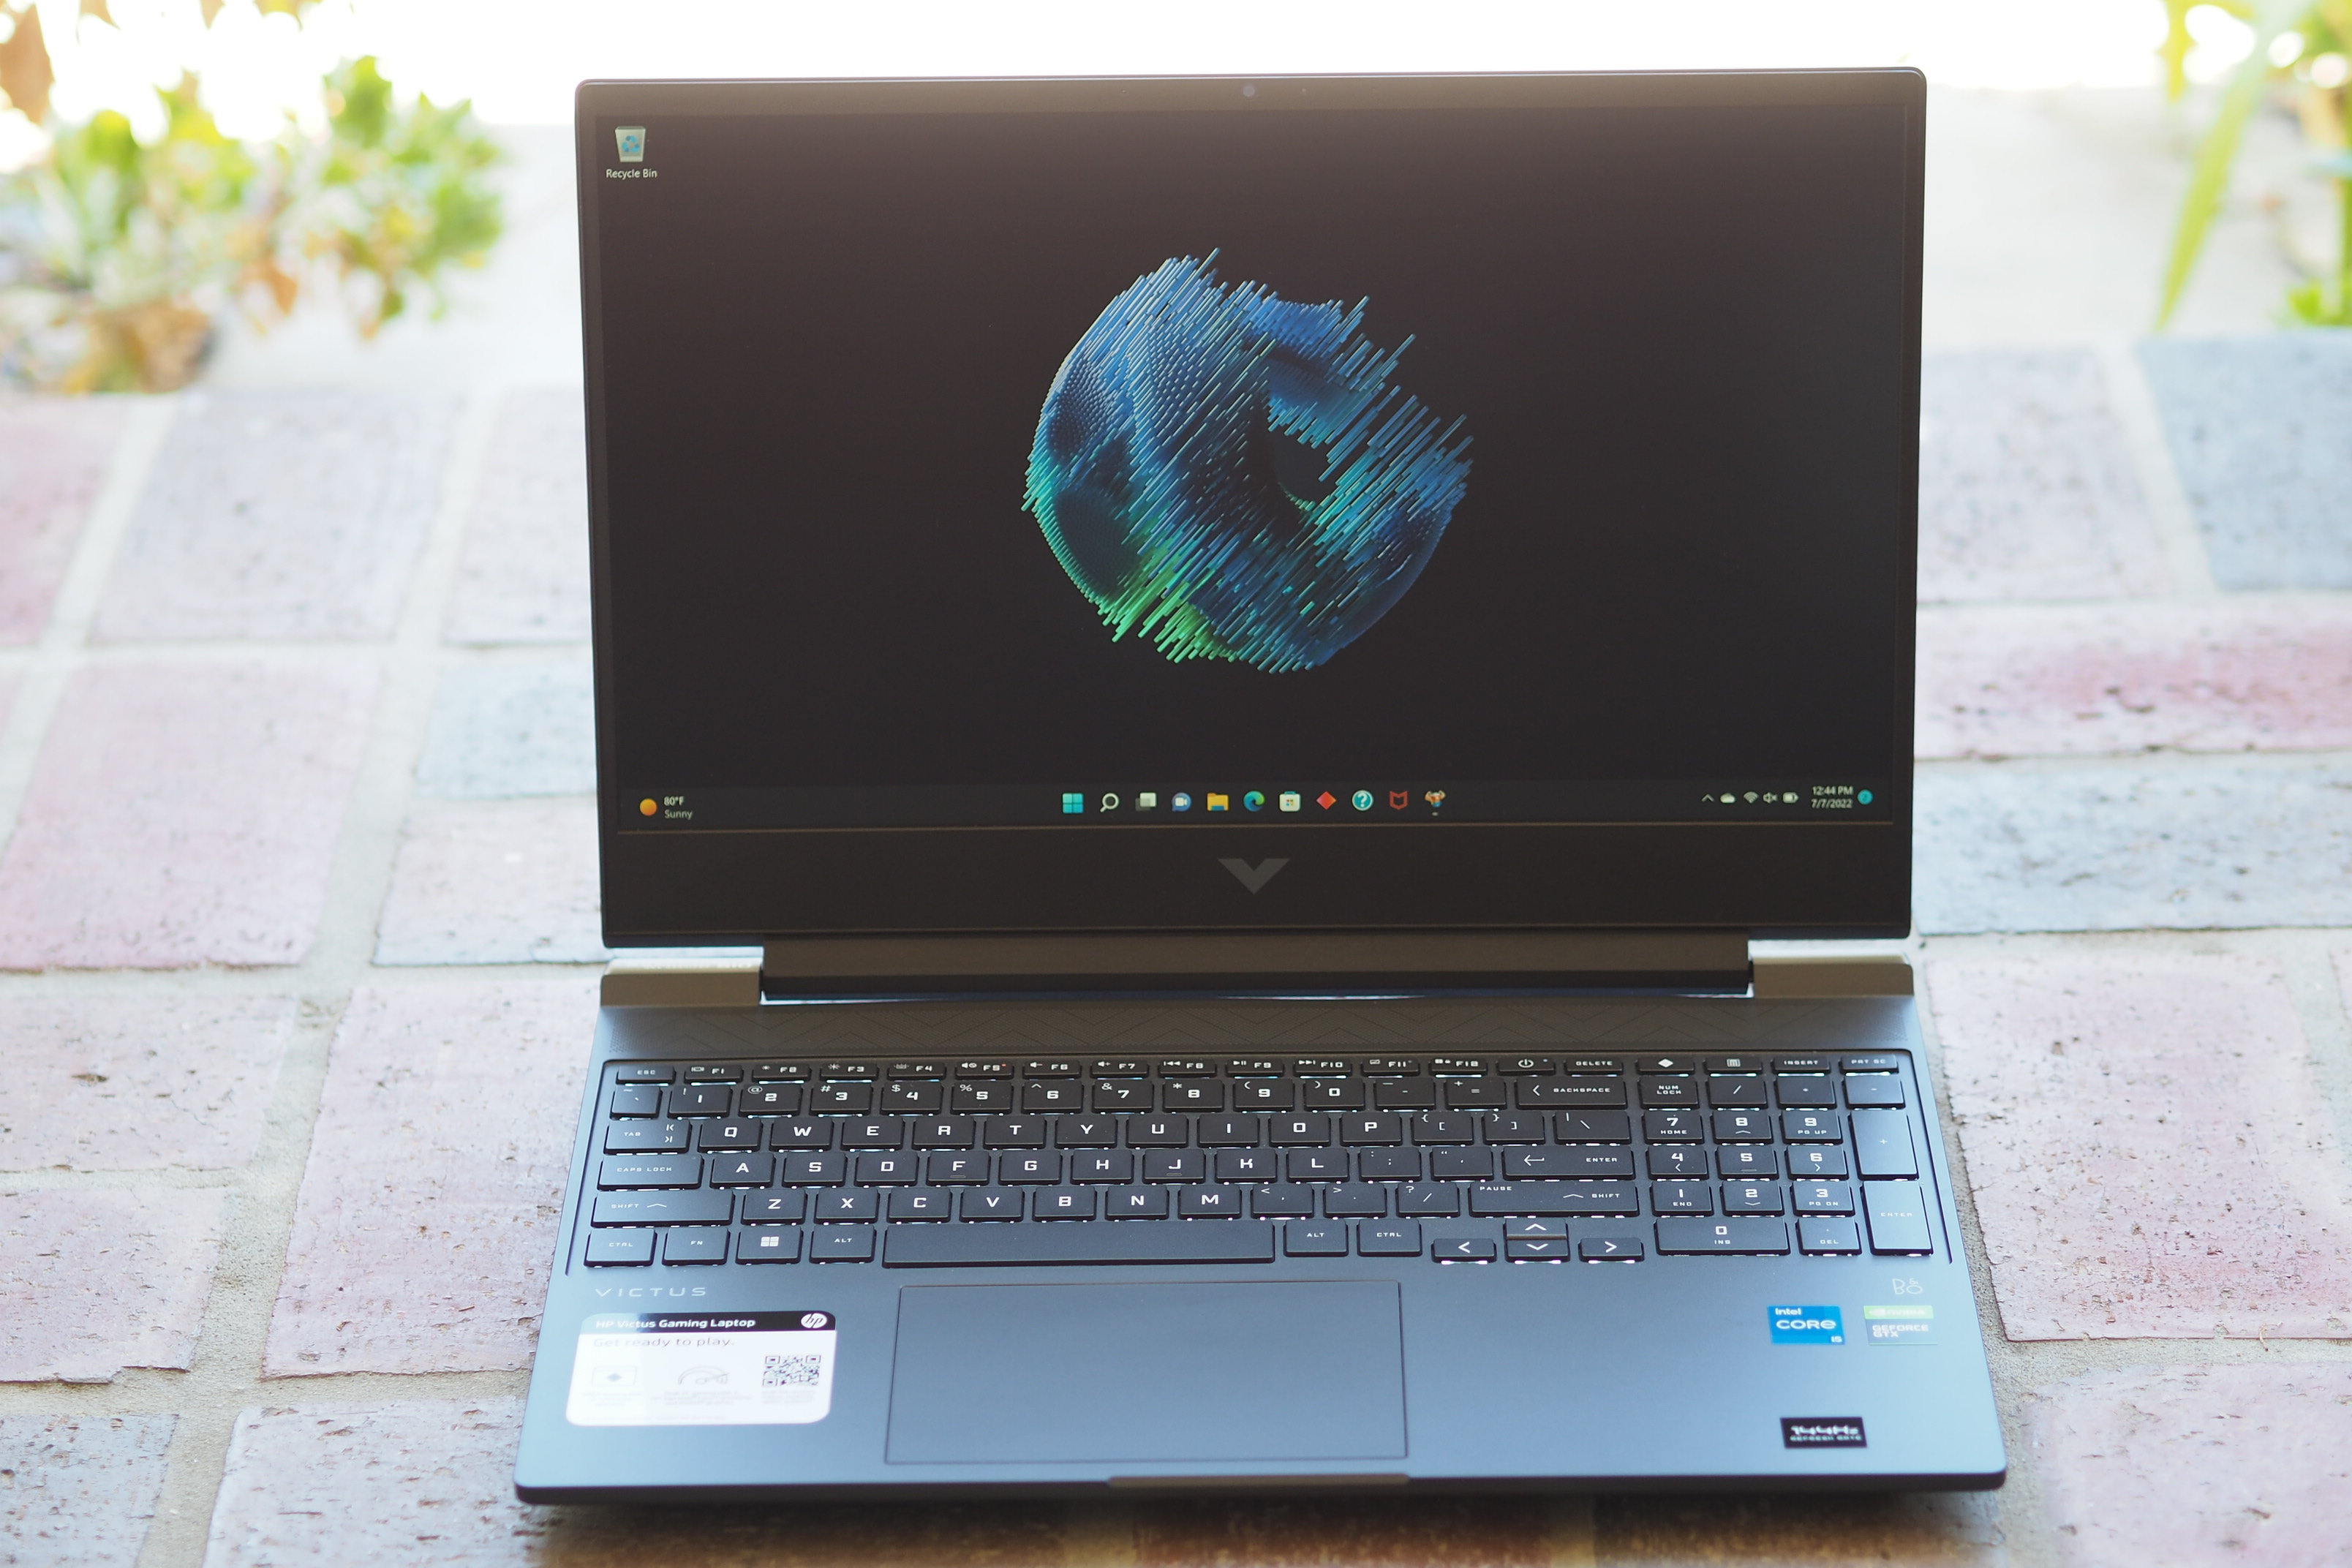 HP Victus 15 review: As cheap as gaming laptops come